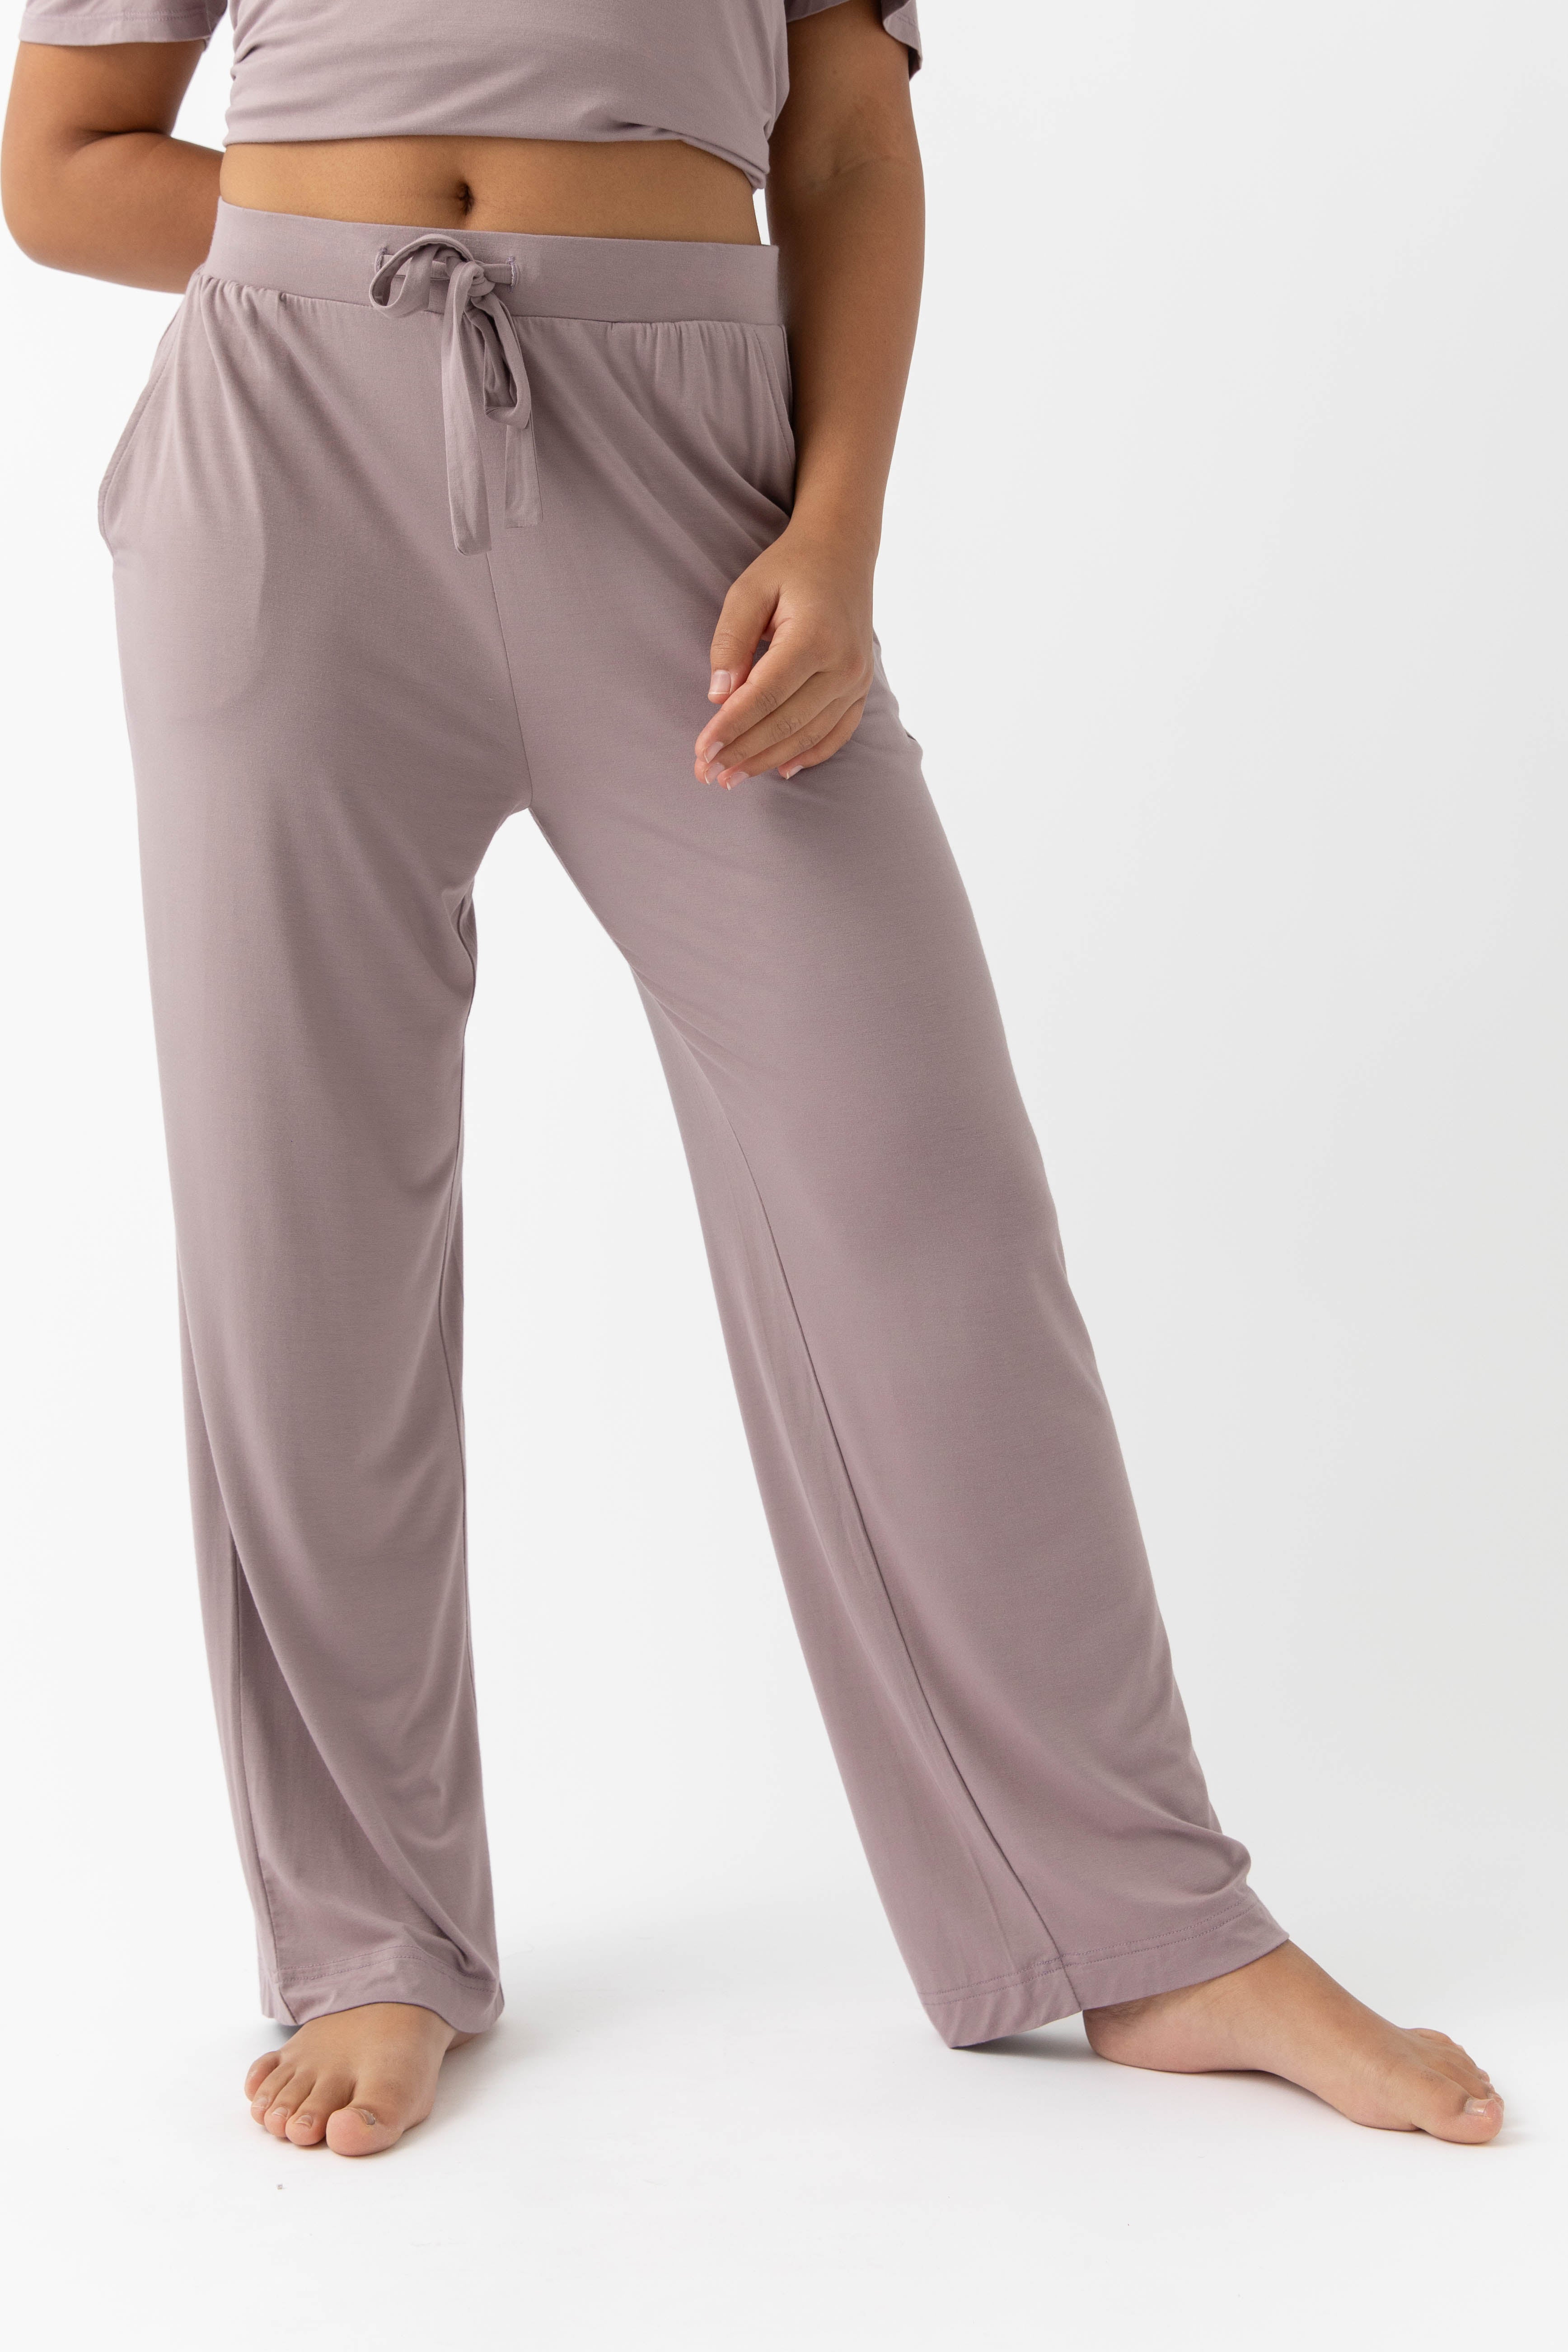 Bamboo / Organic Cotton Relax Pants - XL Only